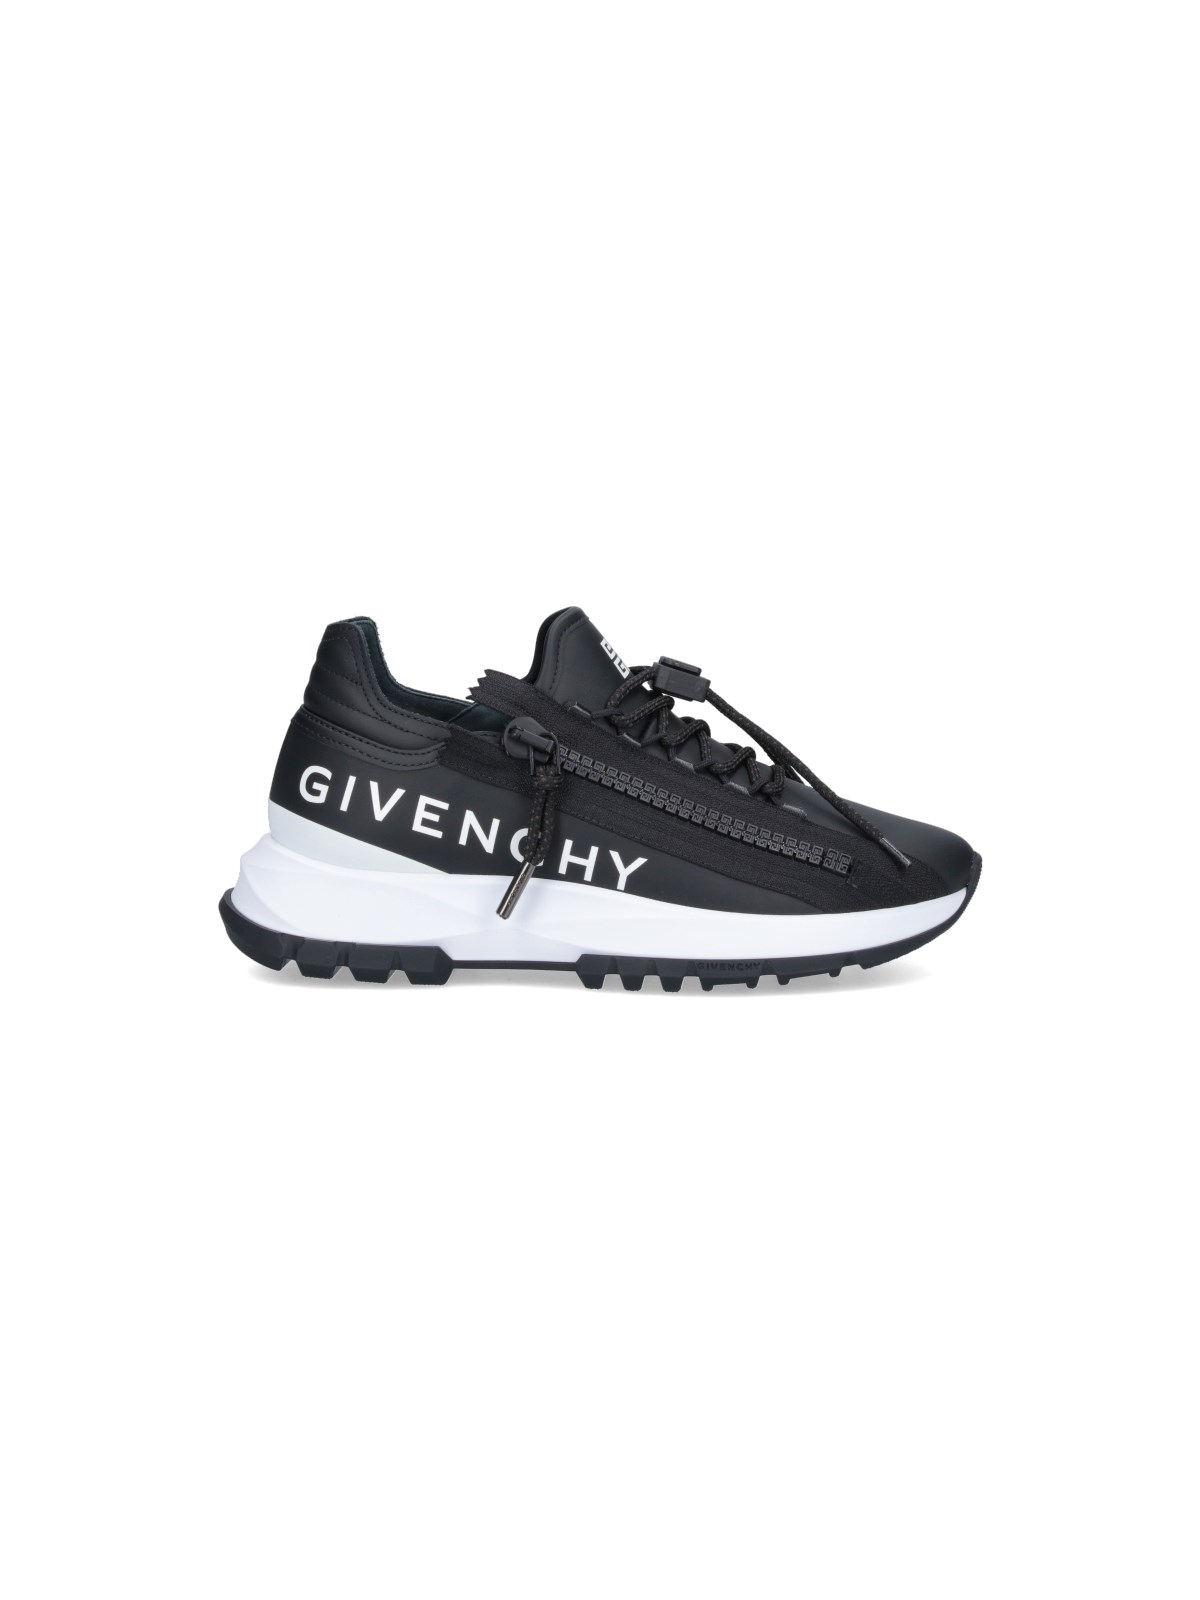 GIVENCHY "RUNNING SPECTRE" SNEAKERS